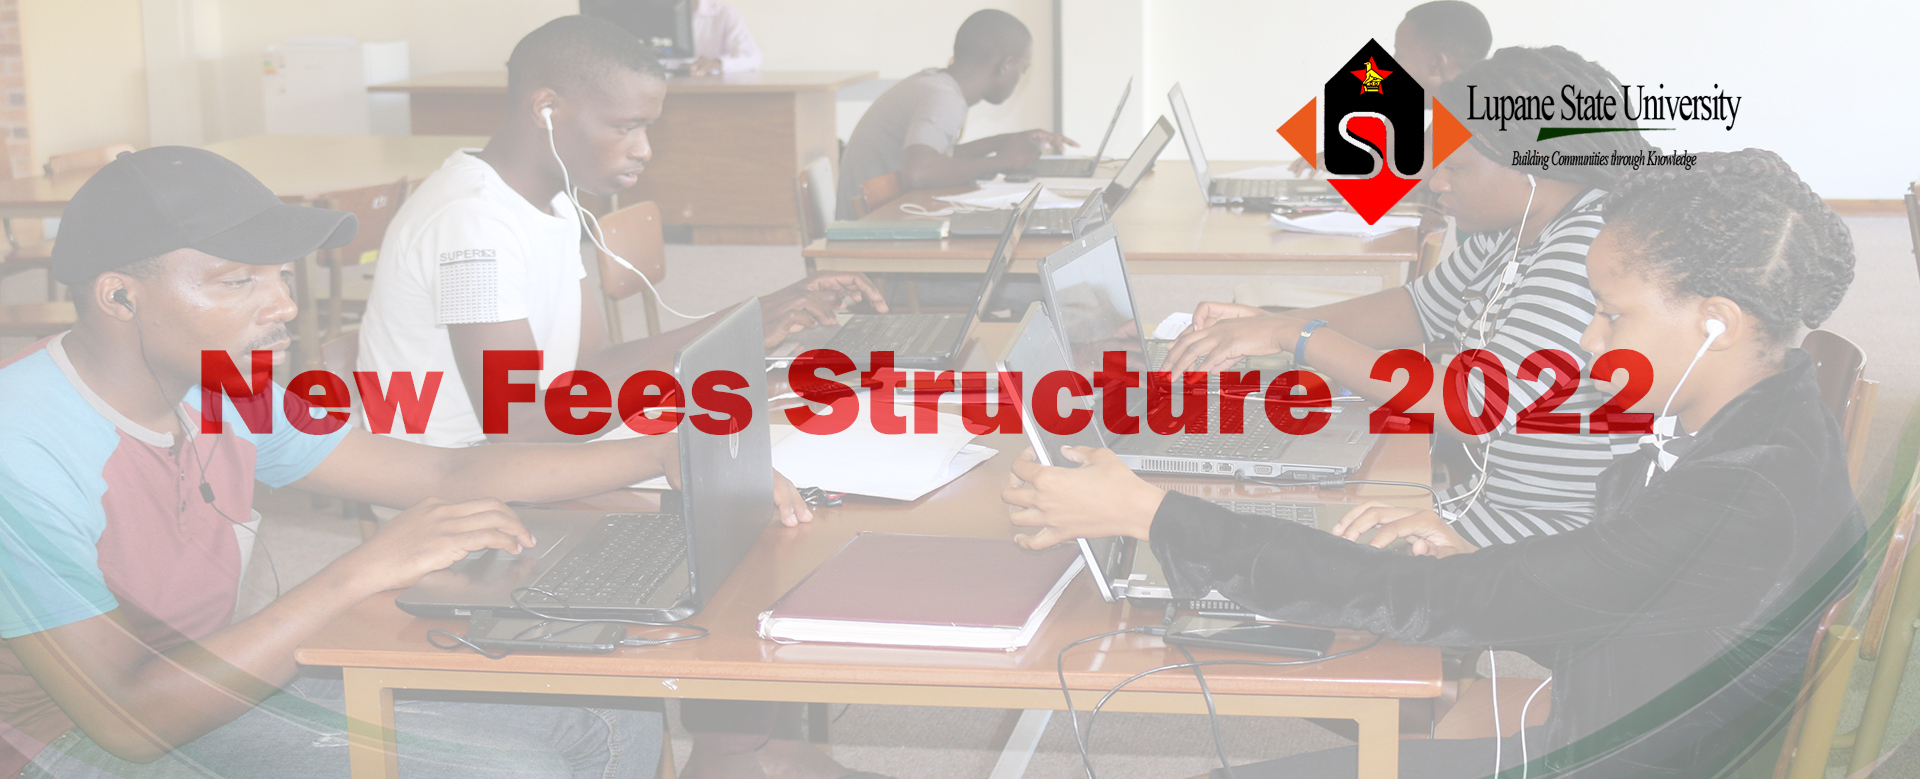 New Fees Structure Aug